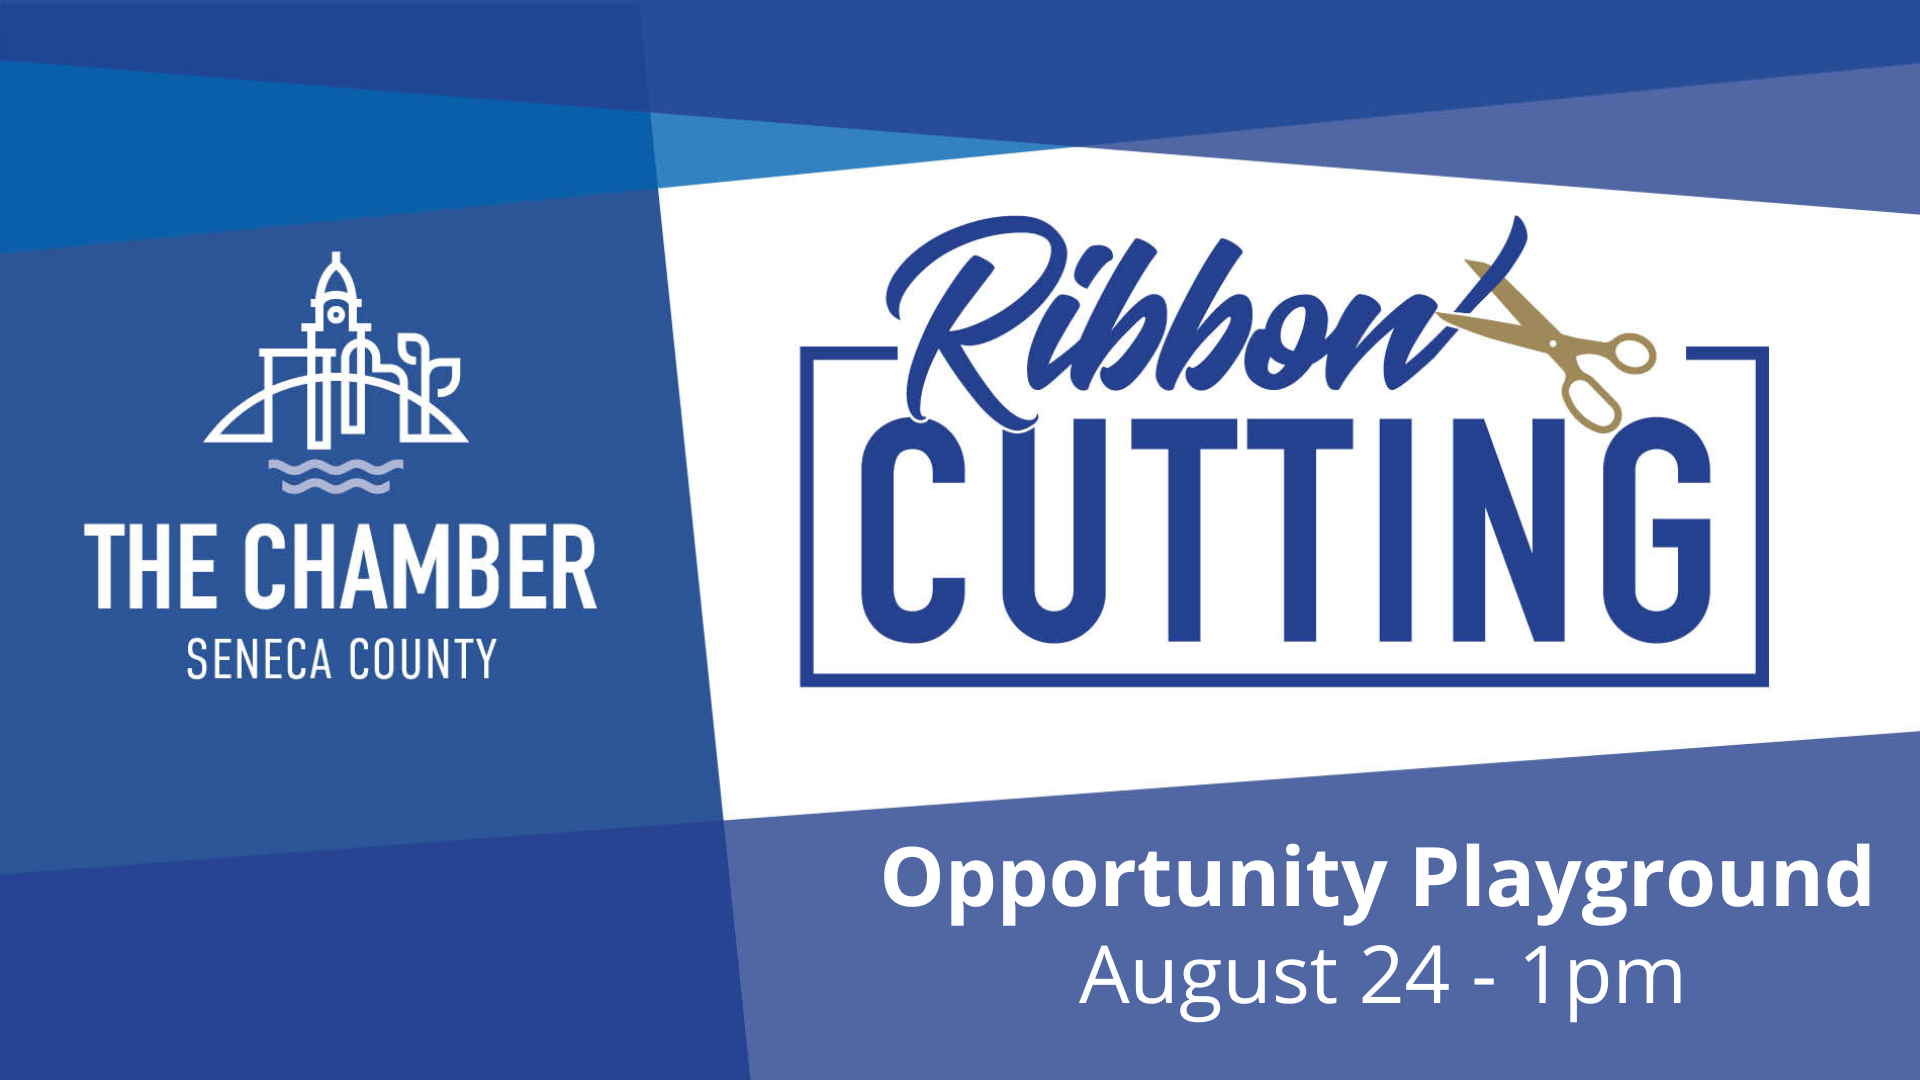 Ribbon Cutting Opportunity Park